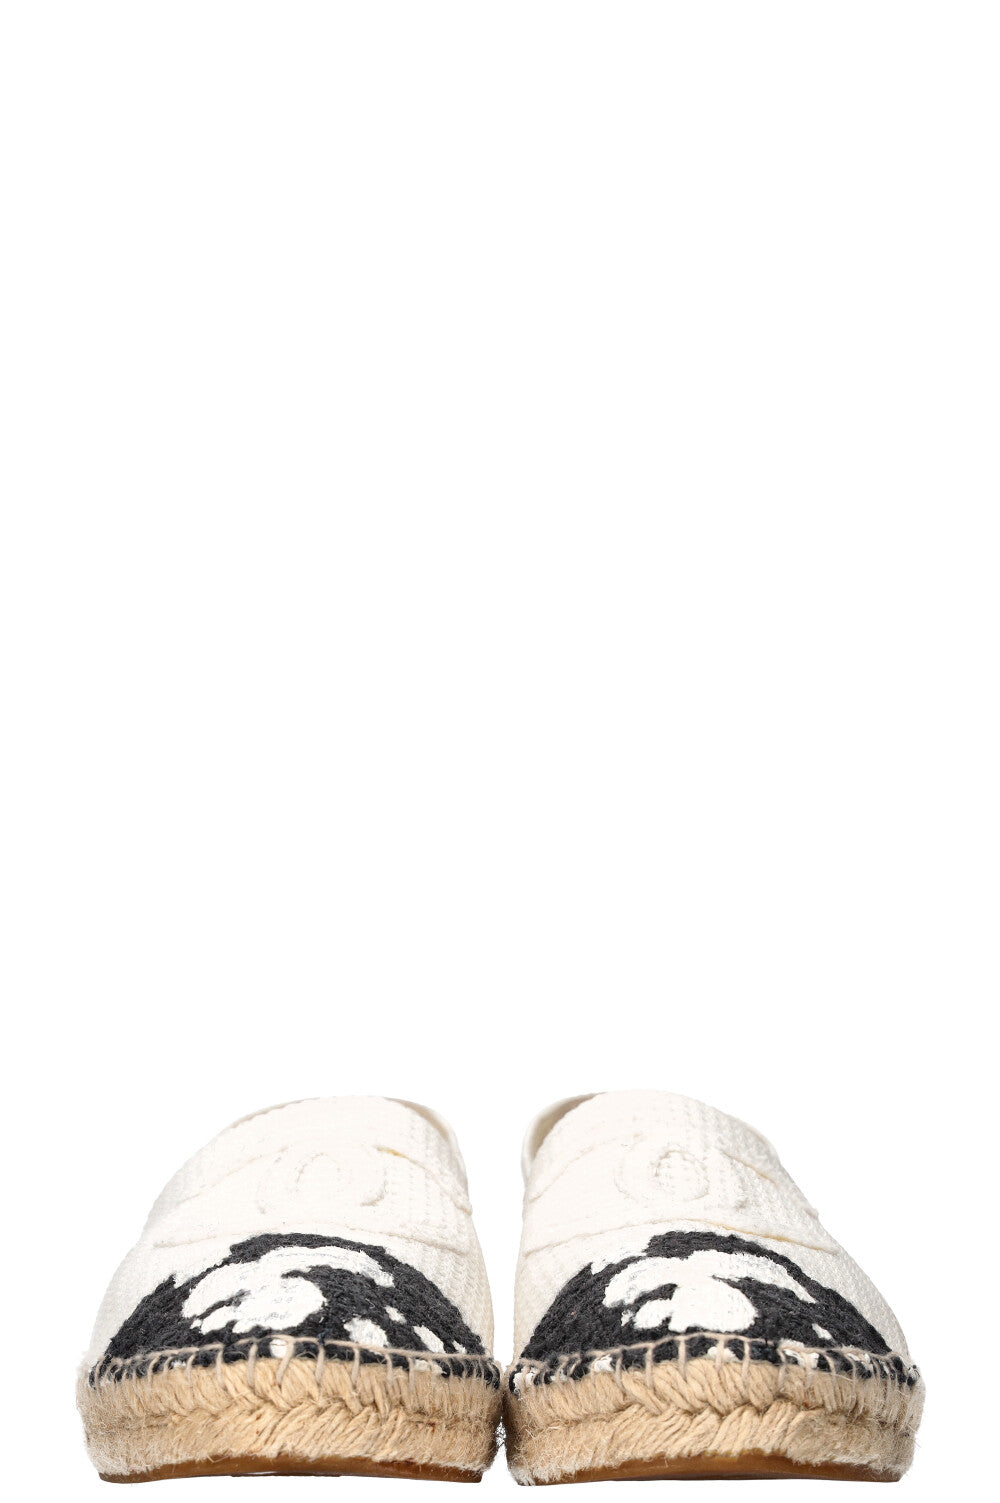 CHANEL Espadrille Flats Black and White